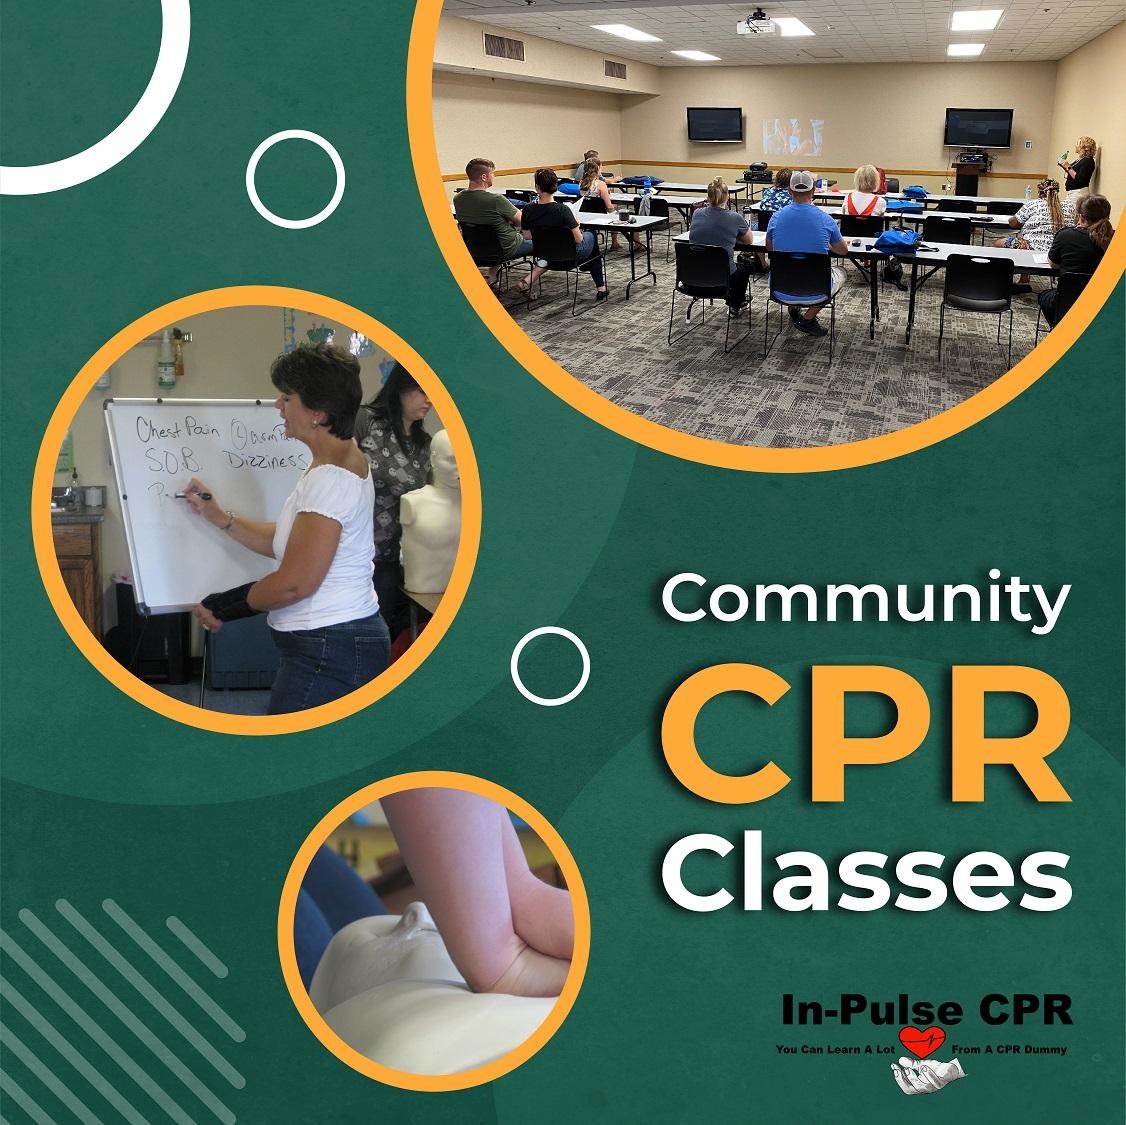 CPR Training by InPulse CPR